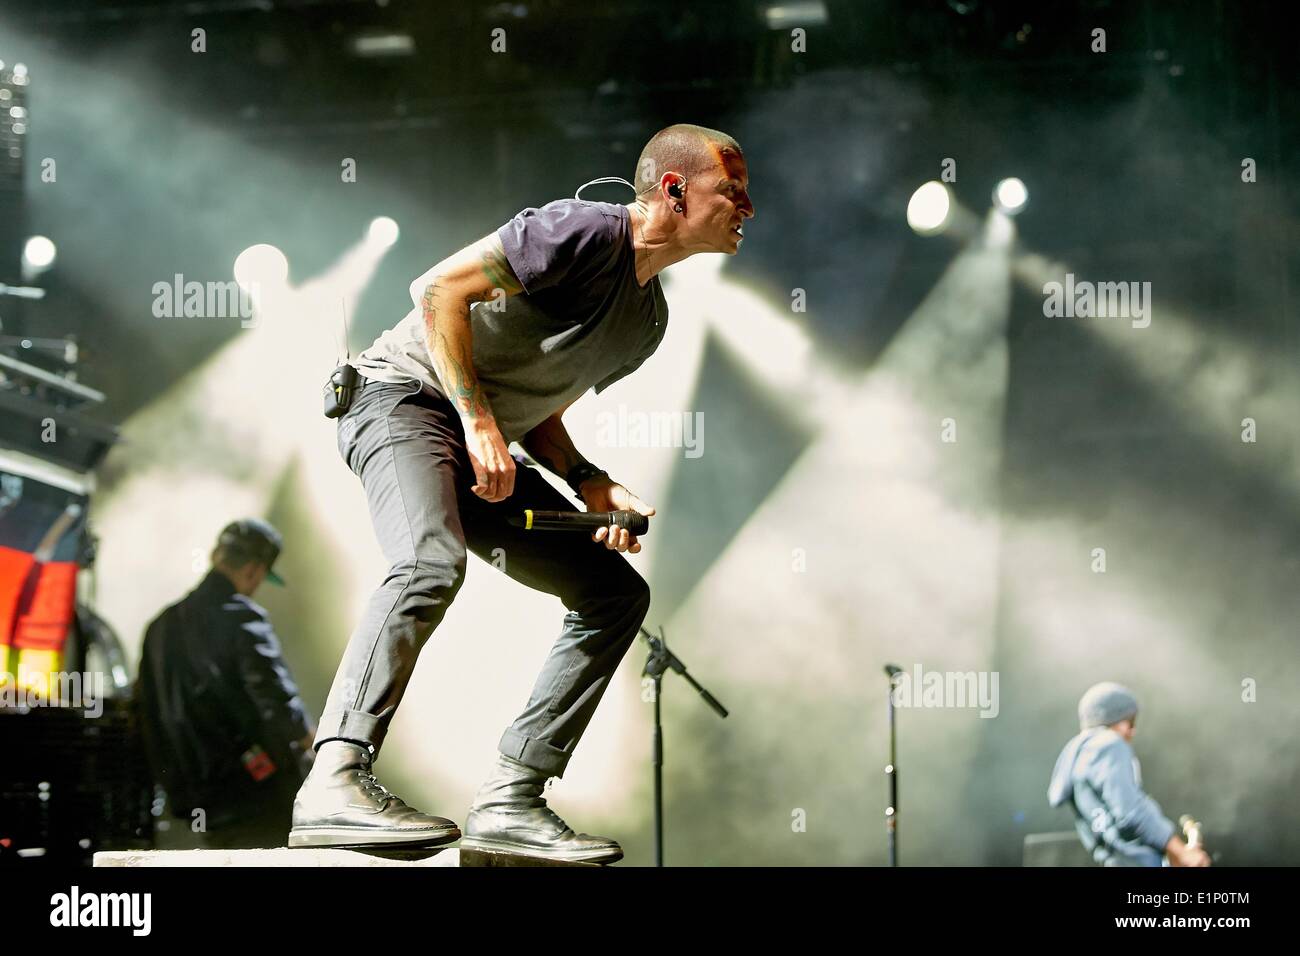 Nuerburg, Germany. 07th June, 2014. Frontman of the US american crossover  band Linkin Park Chester Bennington performs at the rock music festival ' Rock am Ring' at Nuerburgring motorsports complex in Nuerburg, Germany,